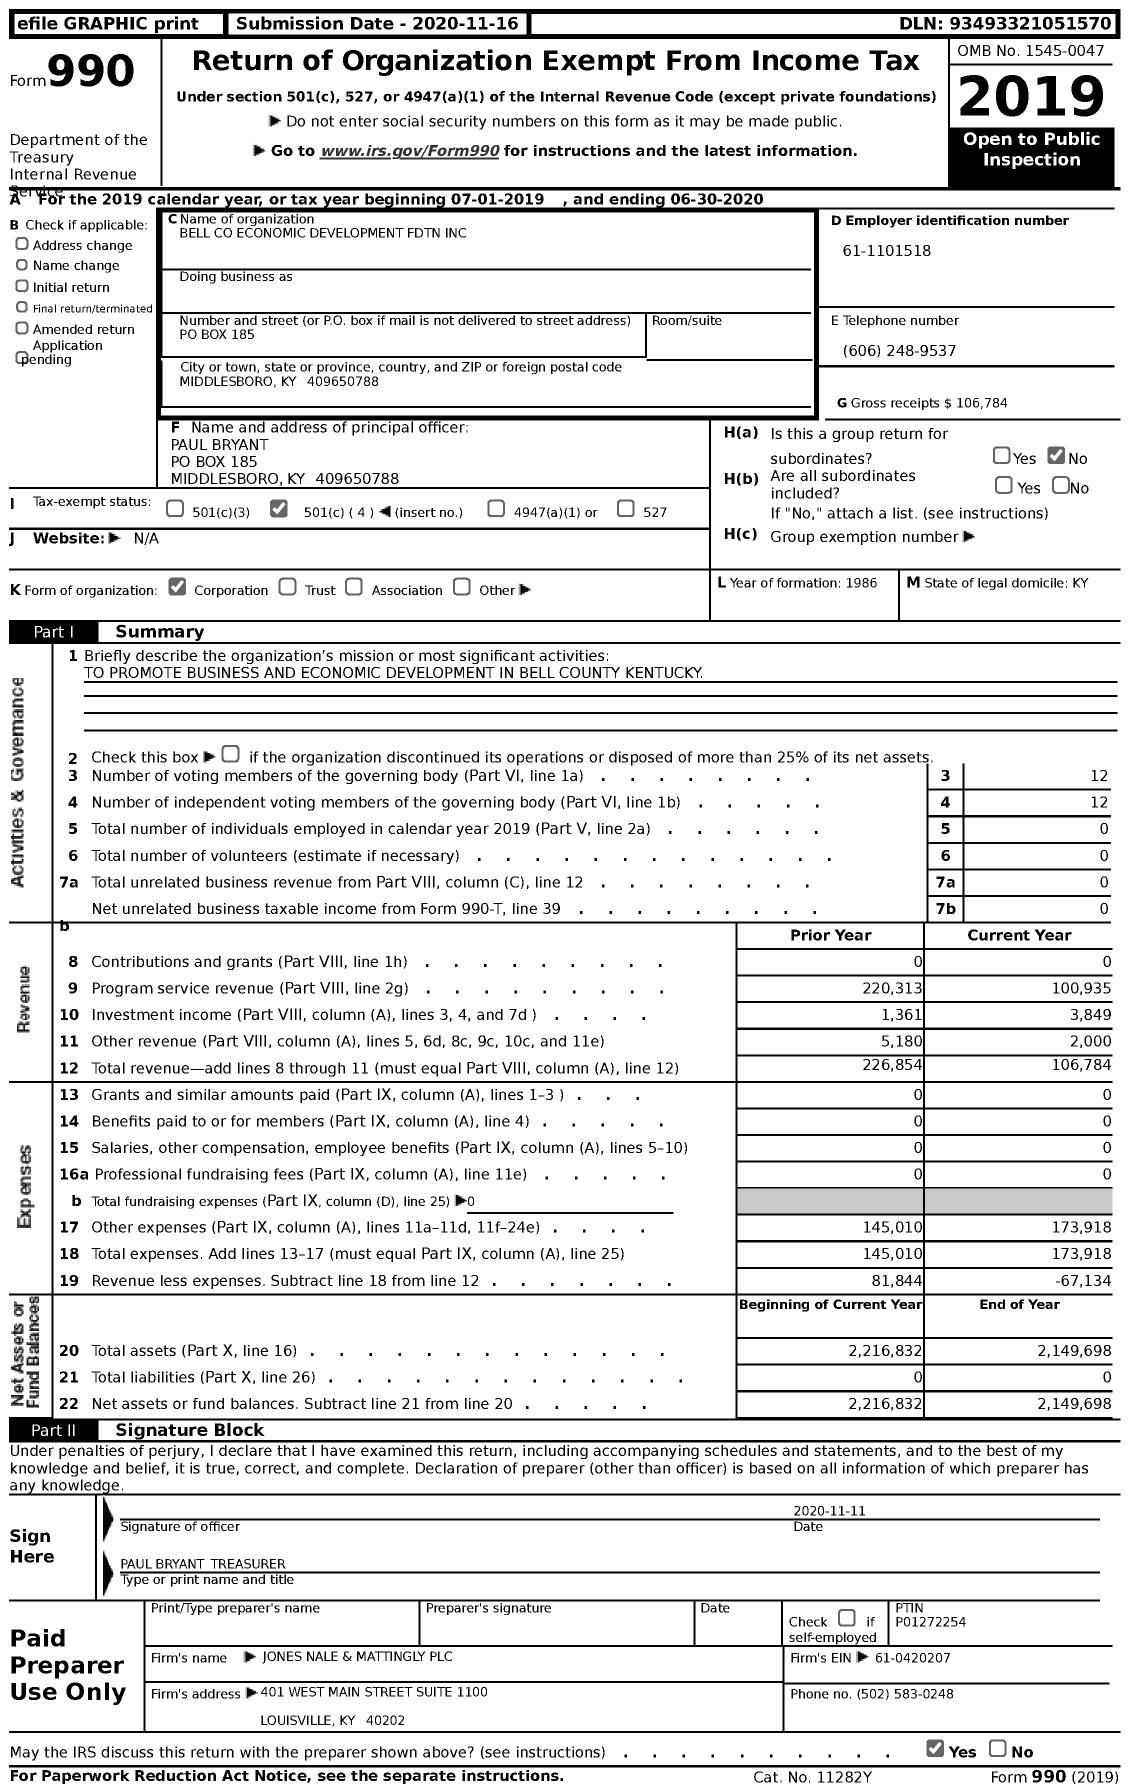 Image of first page of 2019 Form 990 for Bell Economic Development FDTN